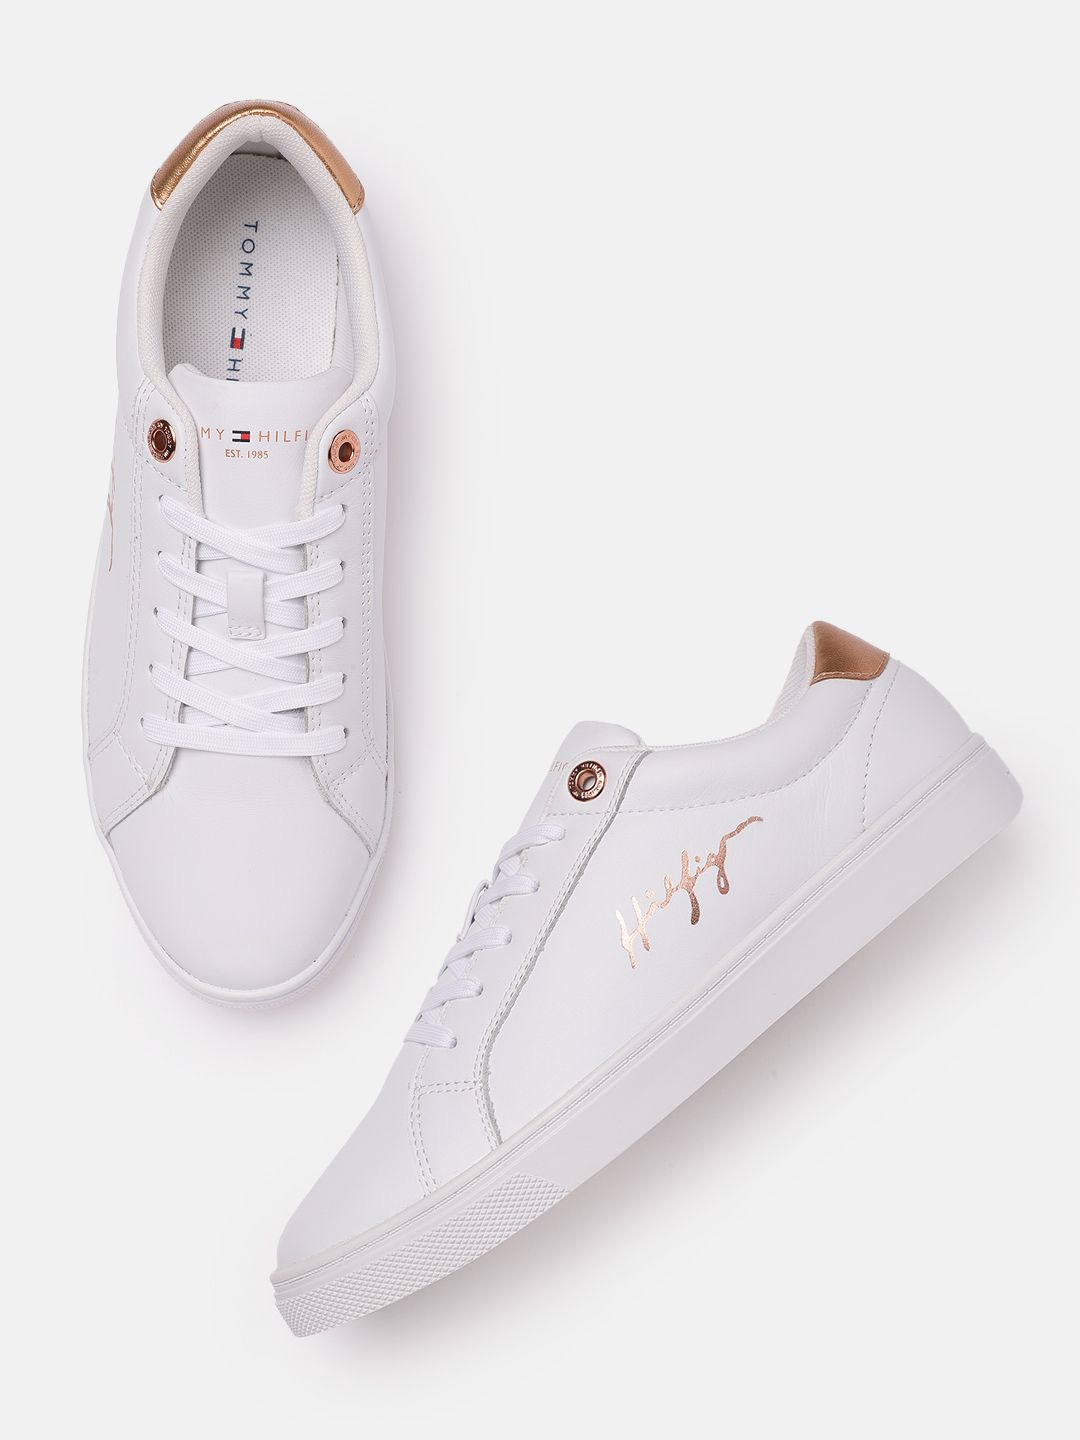 Tommy Hilfiger Women White Solid Leather Sneakers Price in India